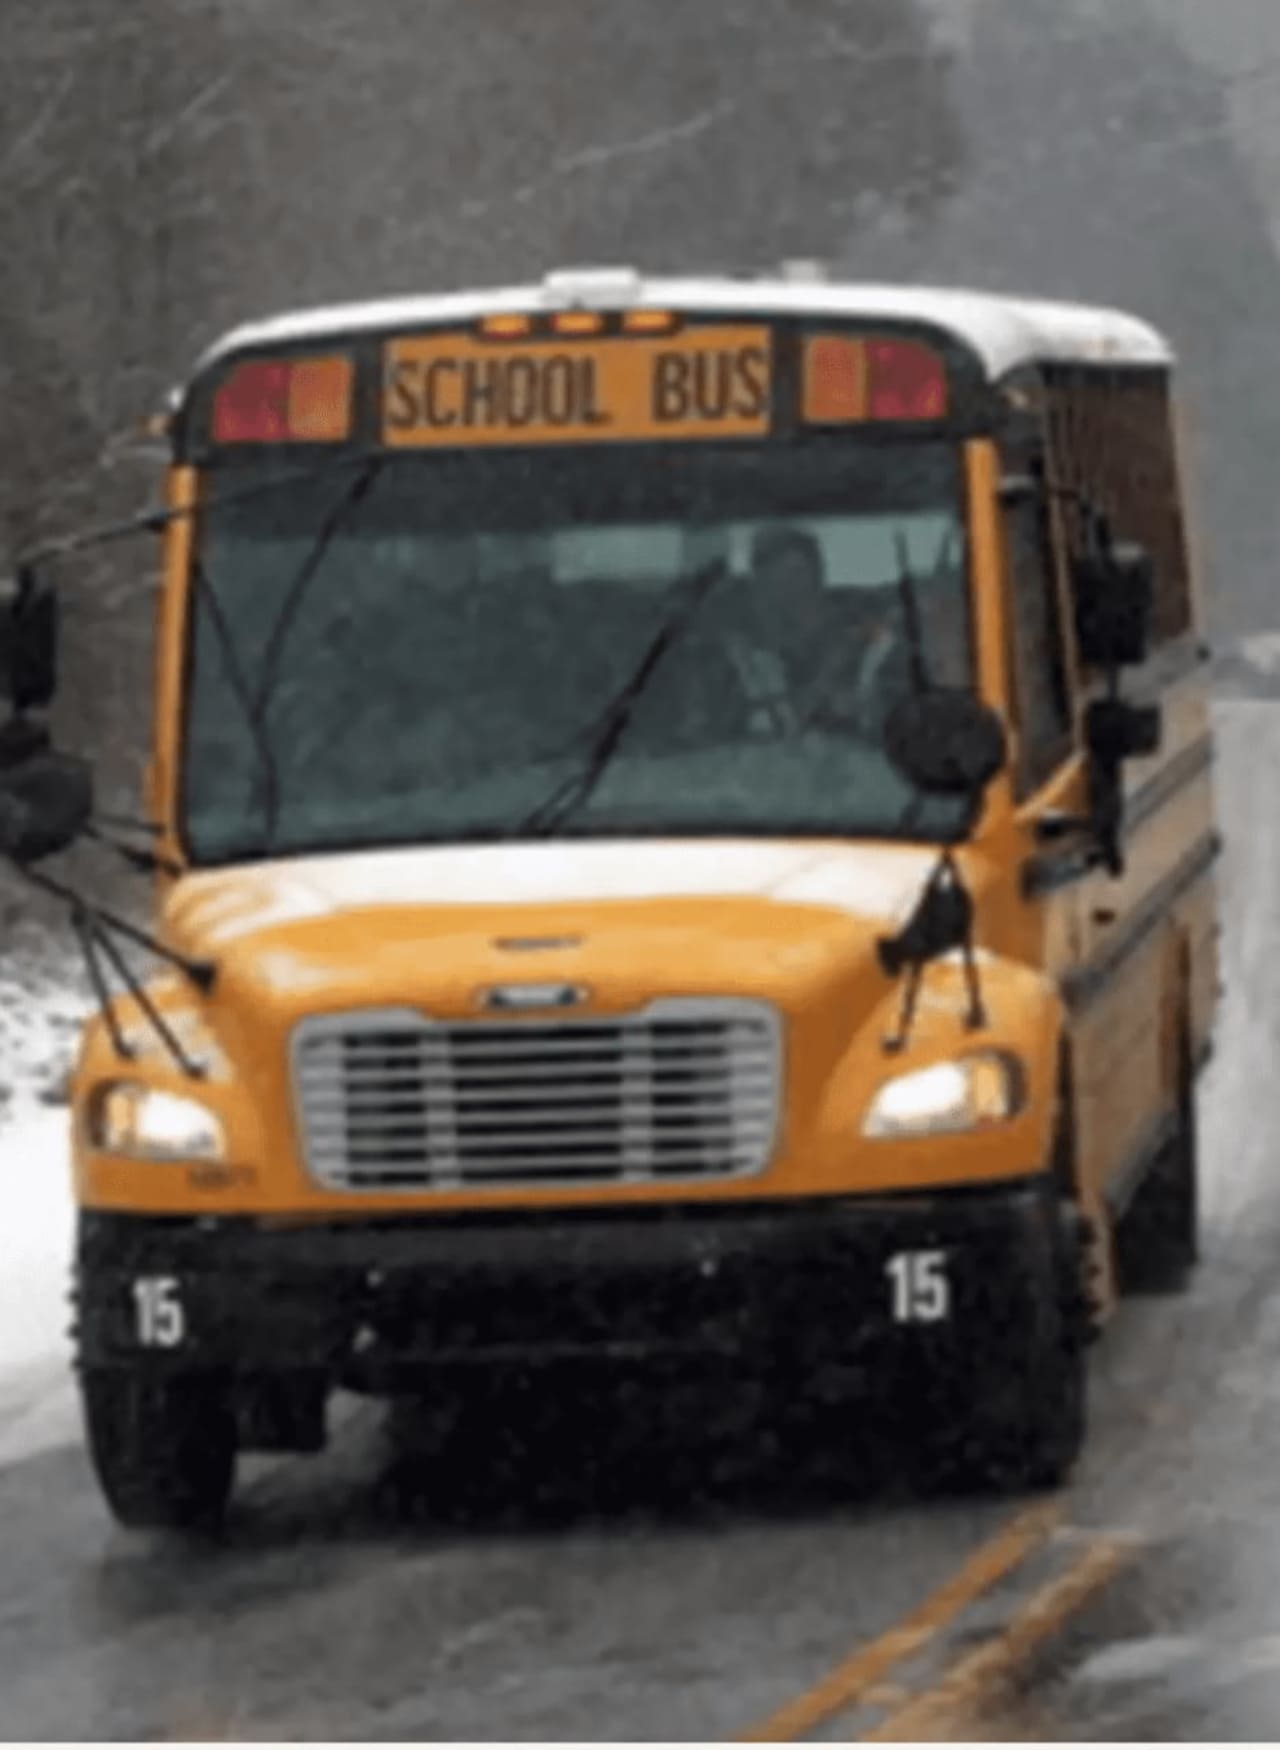 Monroe schools are on a 90-minute delay on Wednesday.